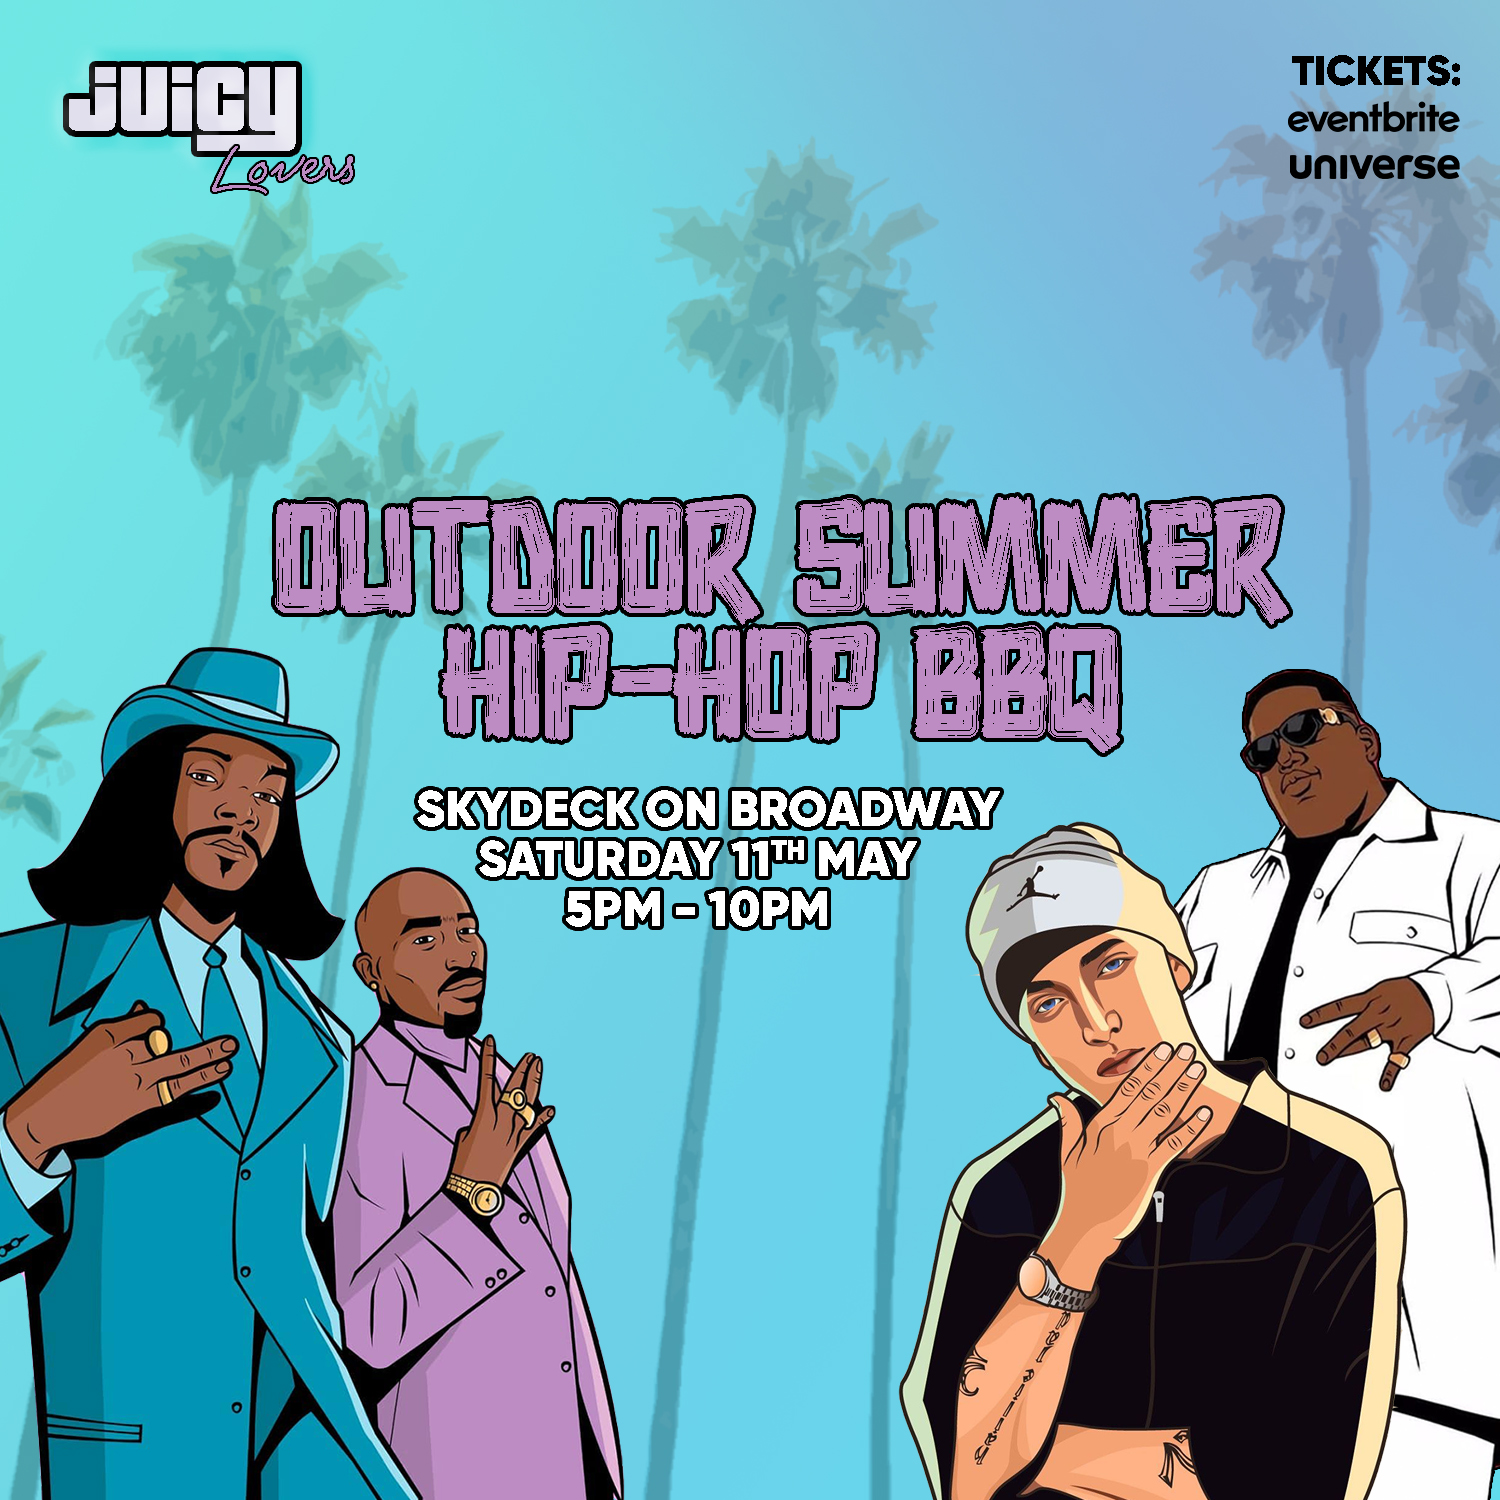 Promo image of Outdoor Summer Hip-Hop BBQ